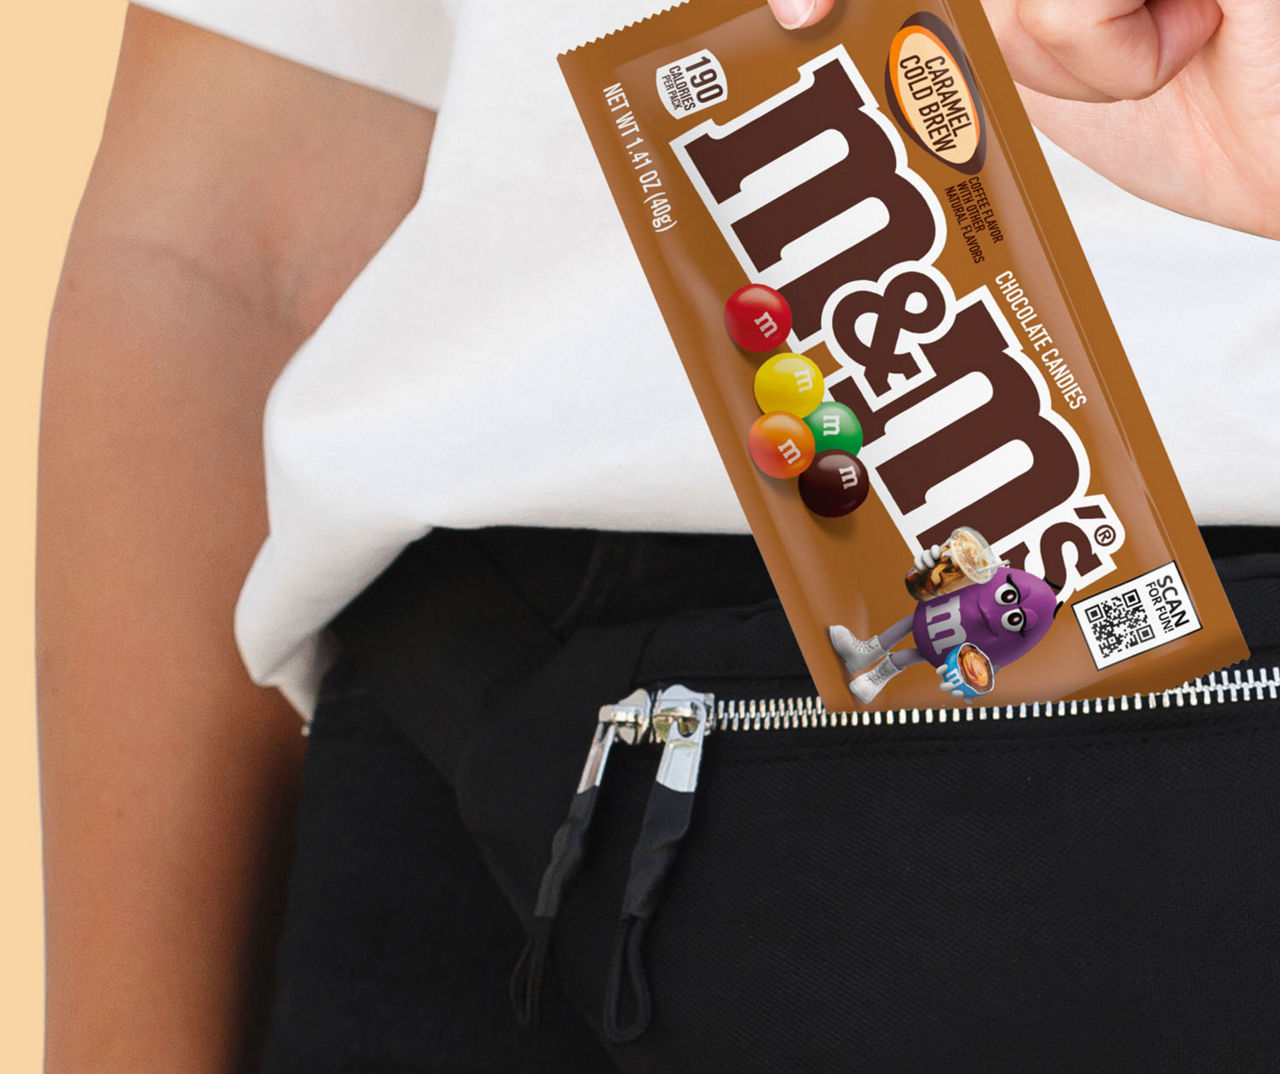 M&M'S Caramel Cold Brew Coffee Flavor Chocolate Candy